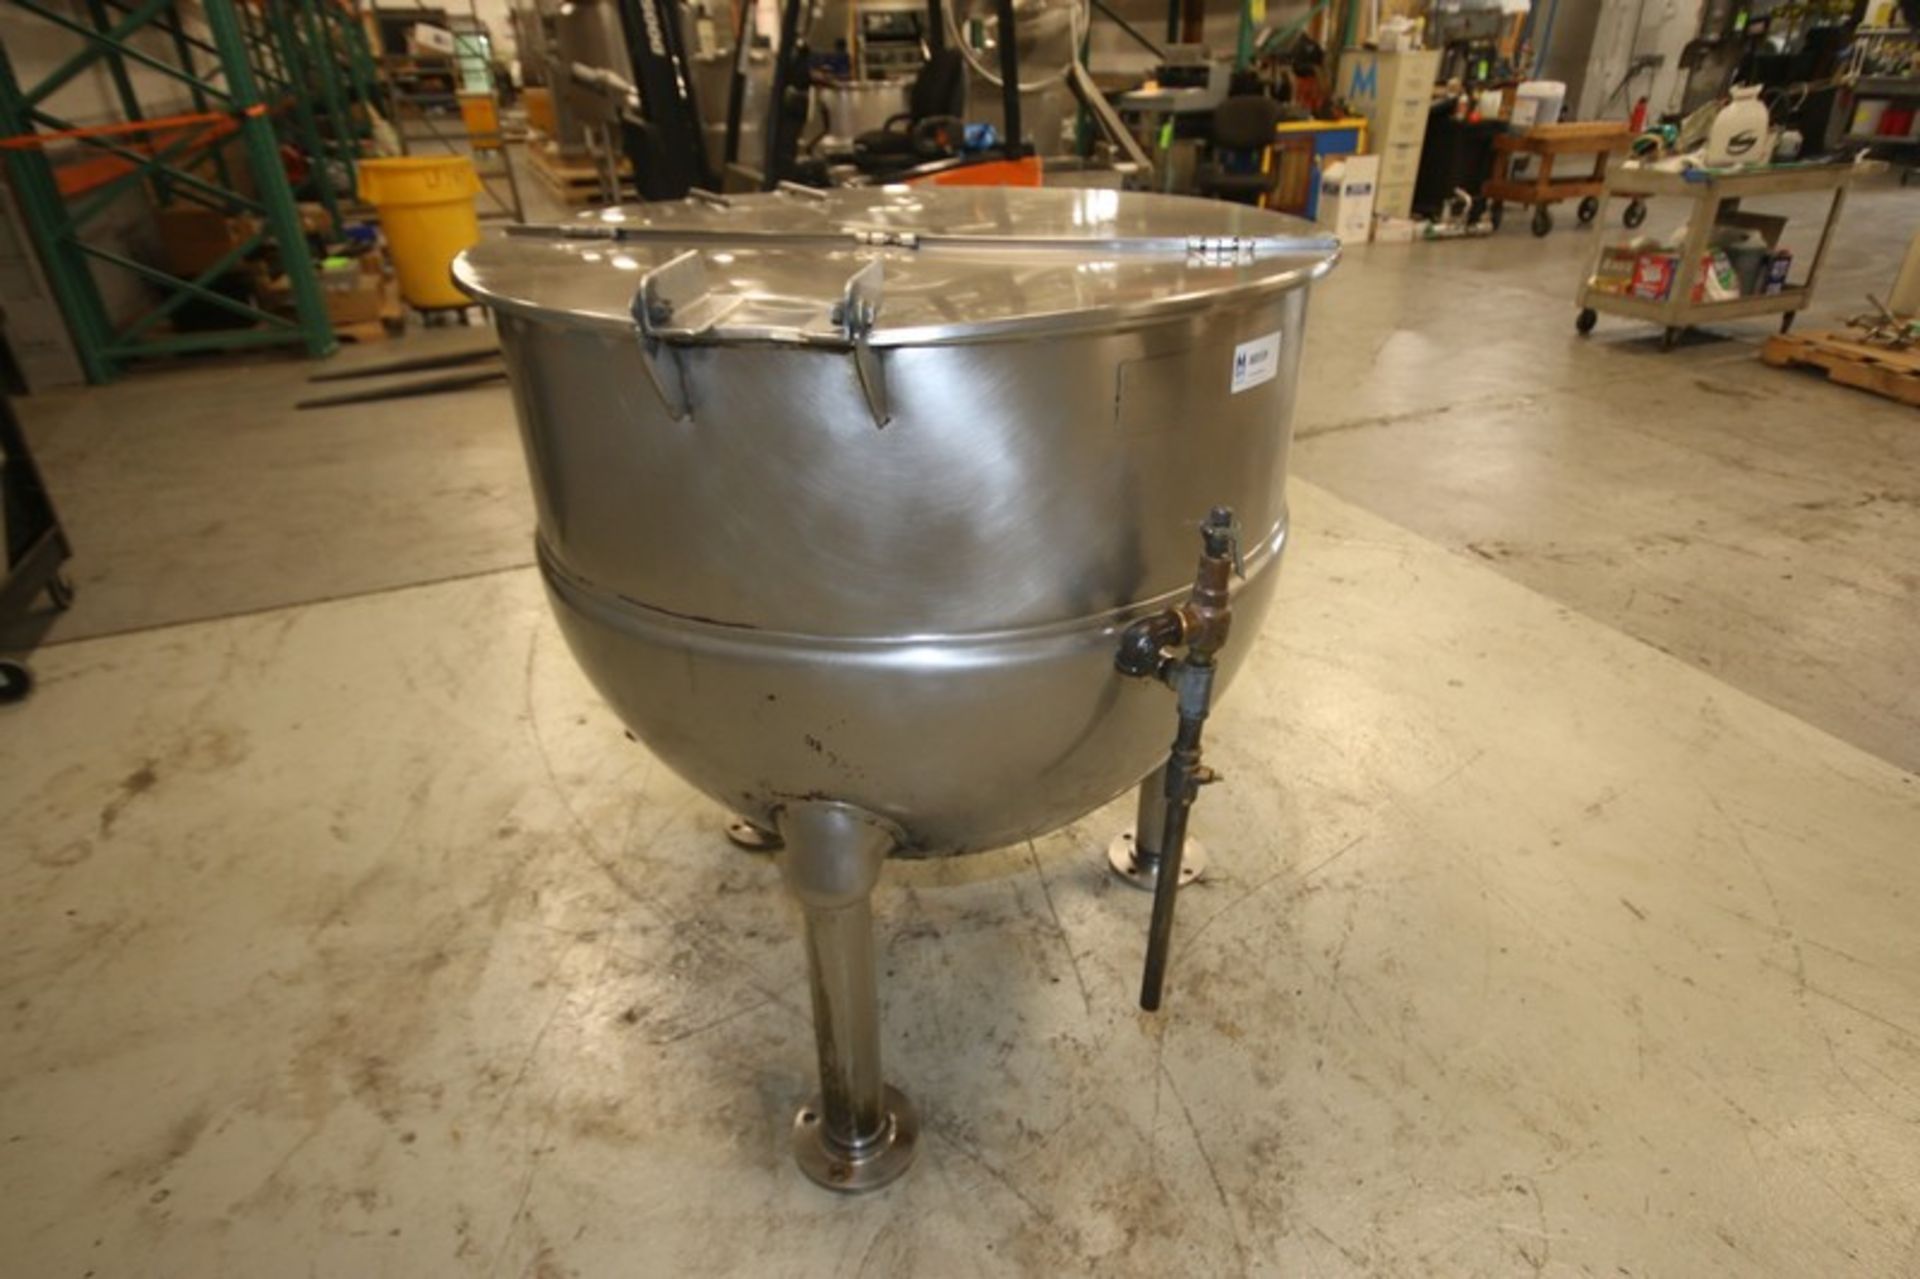 Groen 150 Gallon S/S Jacketed Kettle, Model FT-150 SN 81076-2, with Hinged Lid, 3" Threaded Bottom - Image 4 of 7